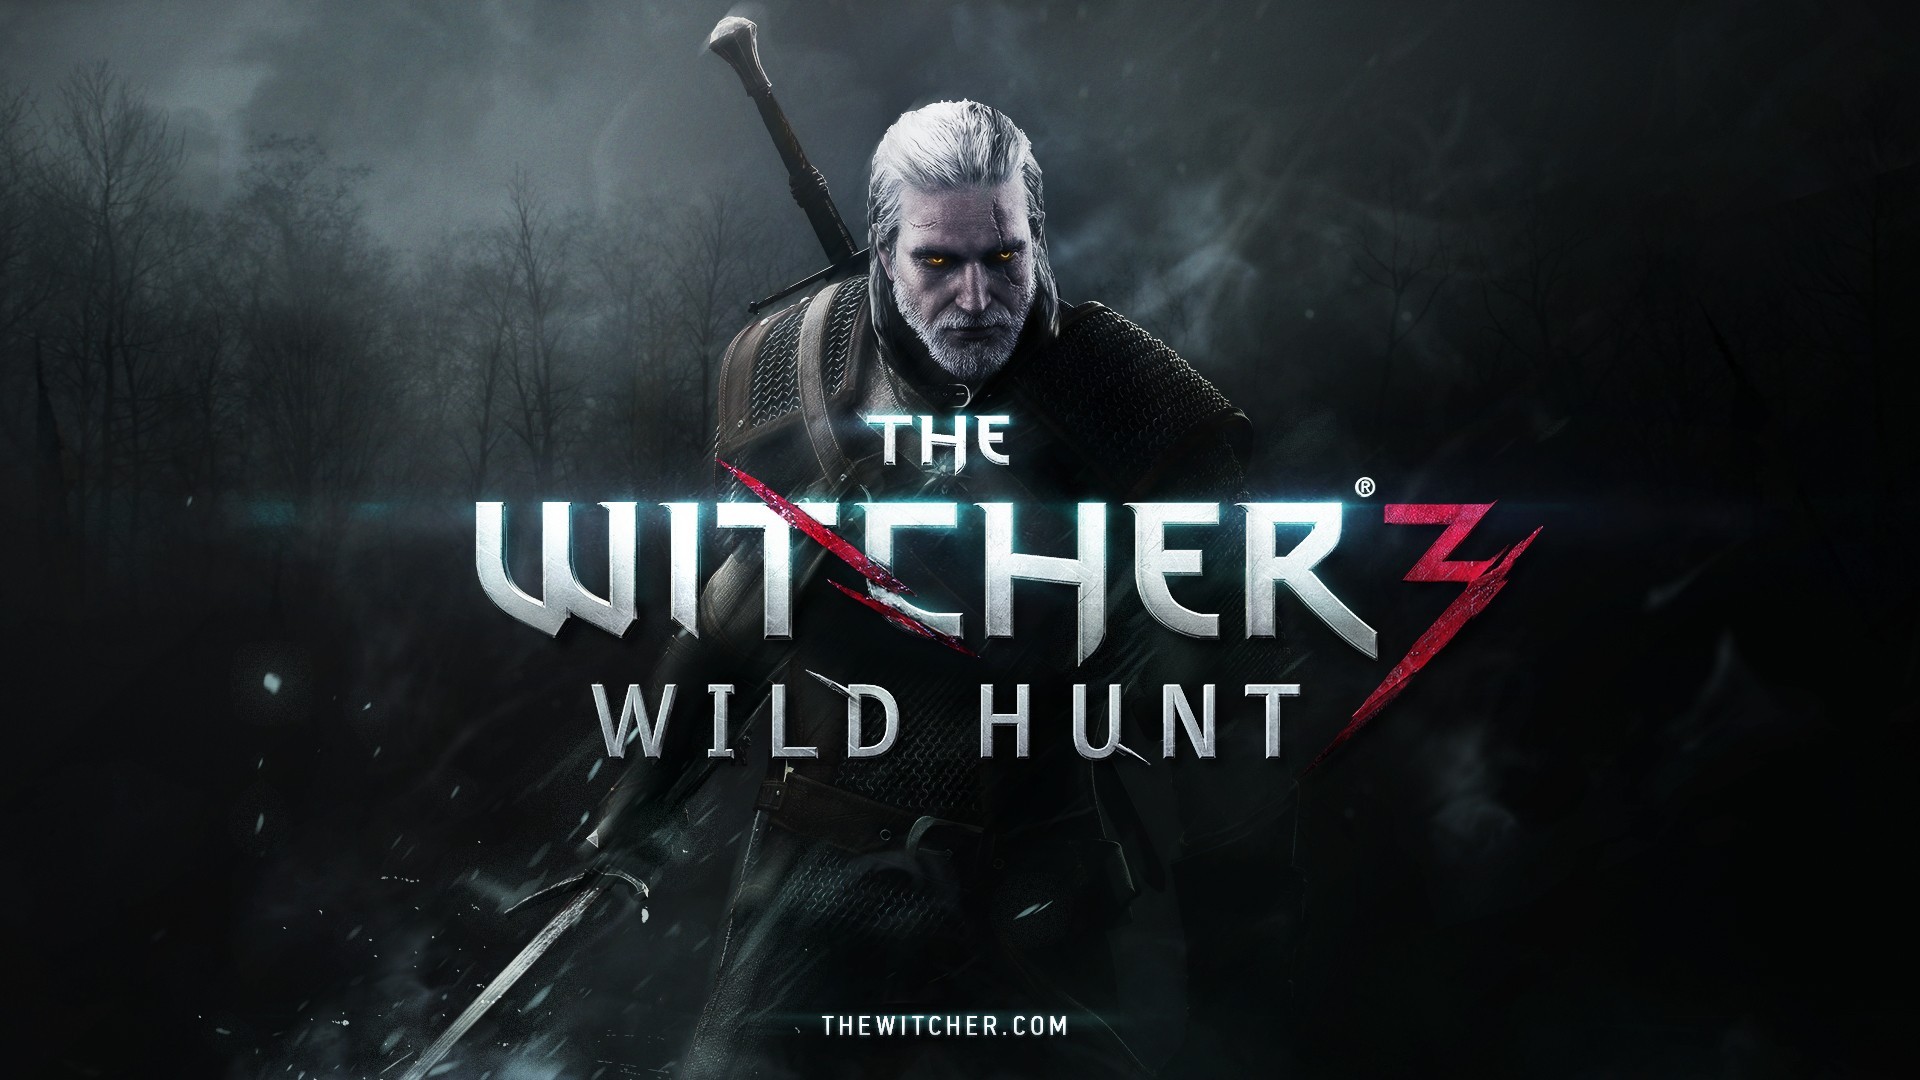 The witcher 3 theme music фото 3